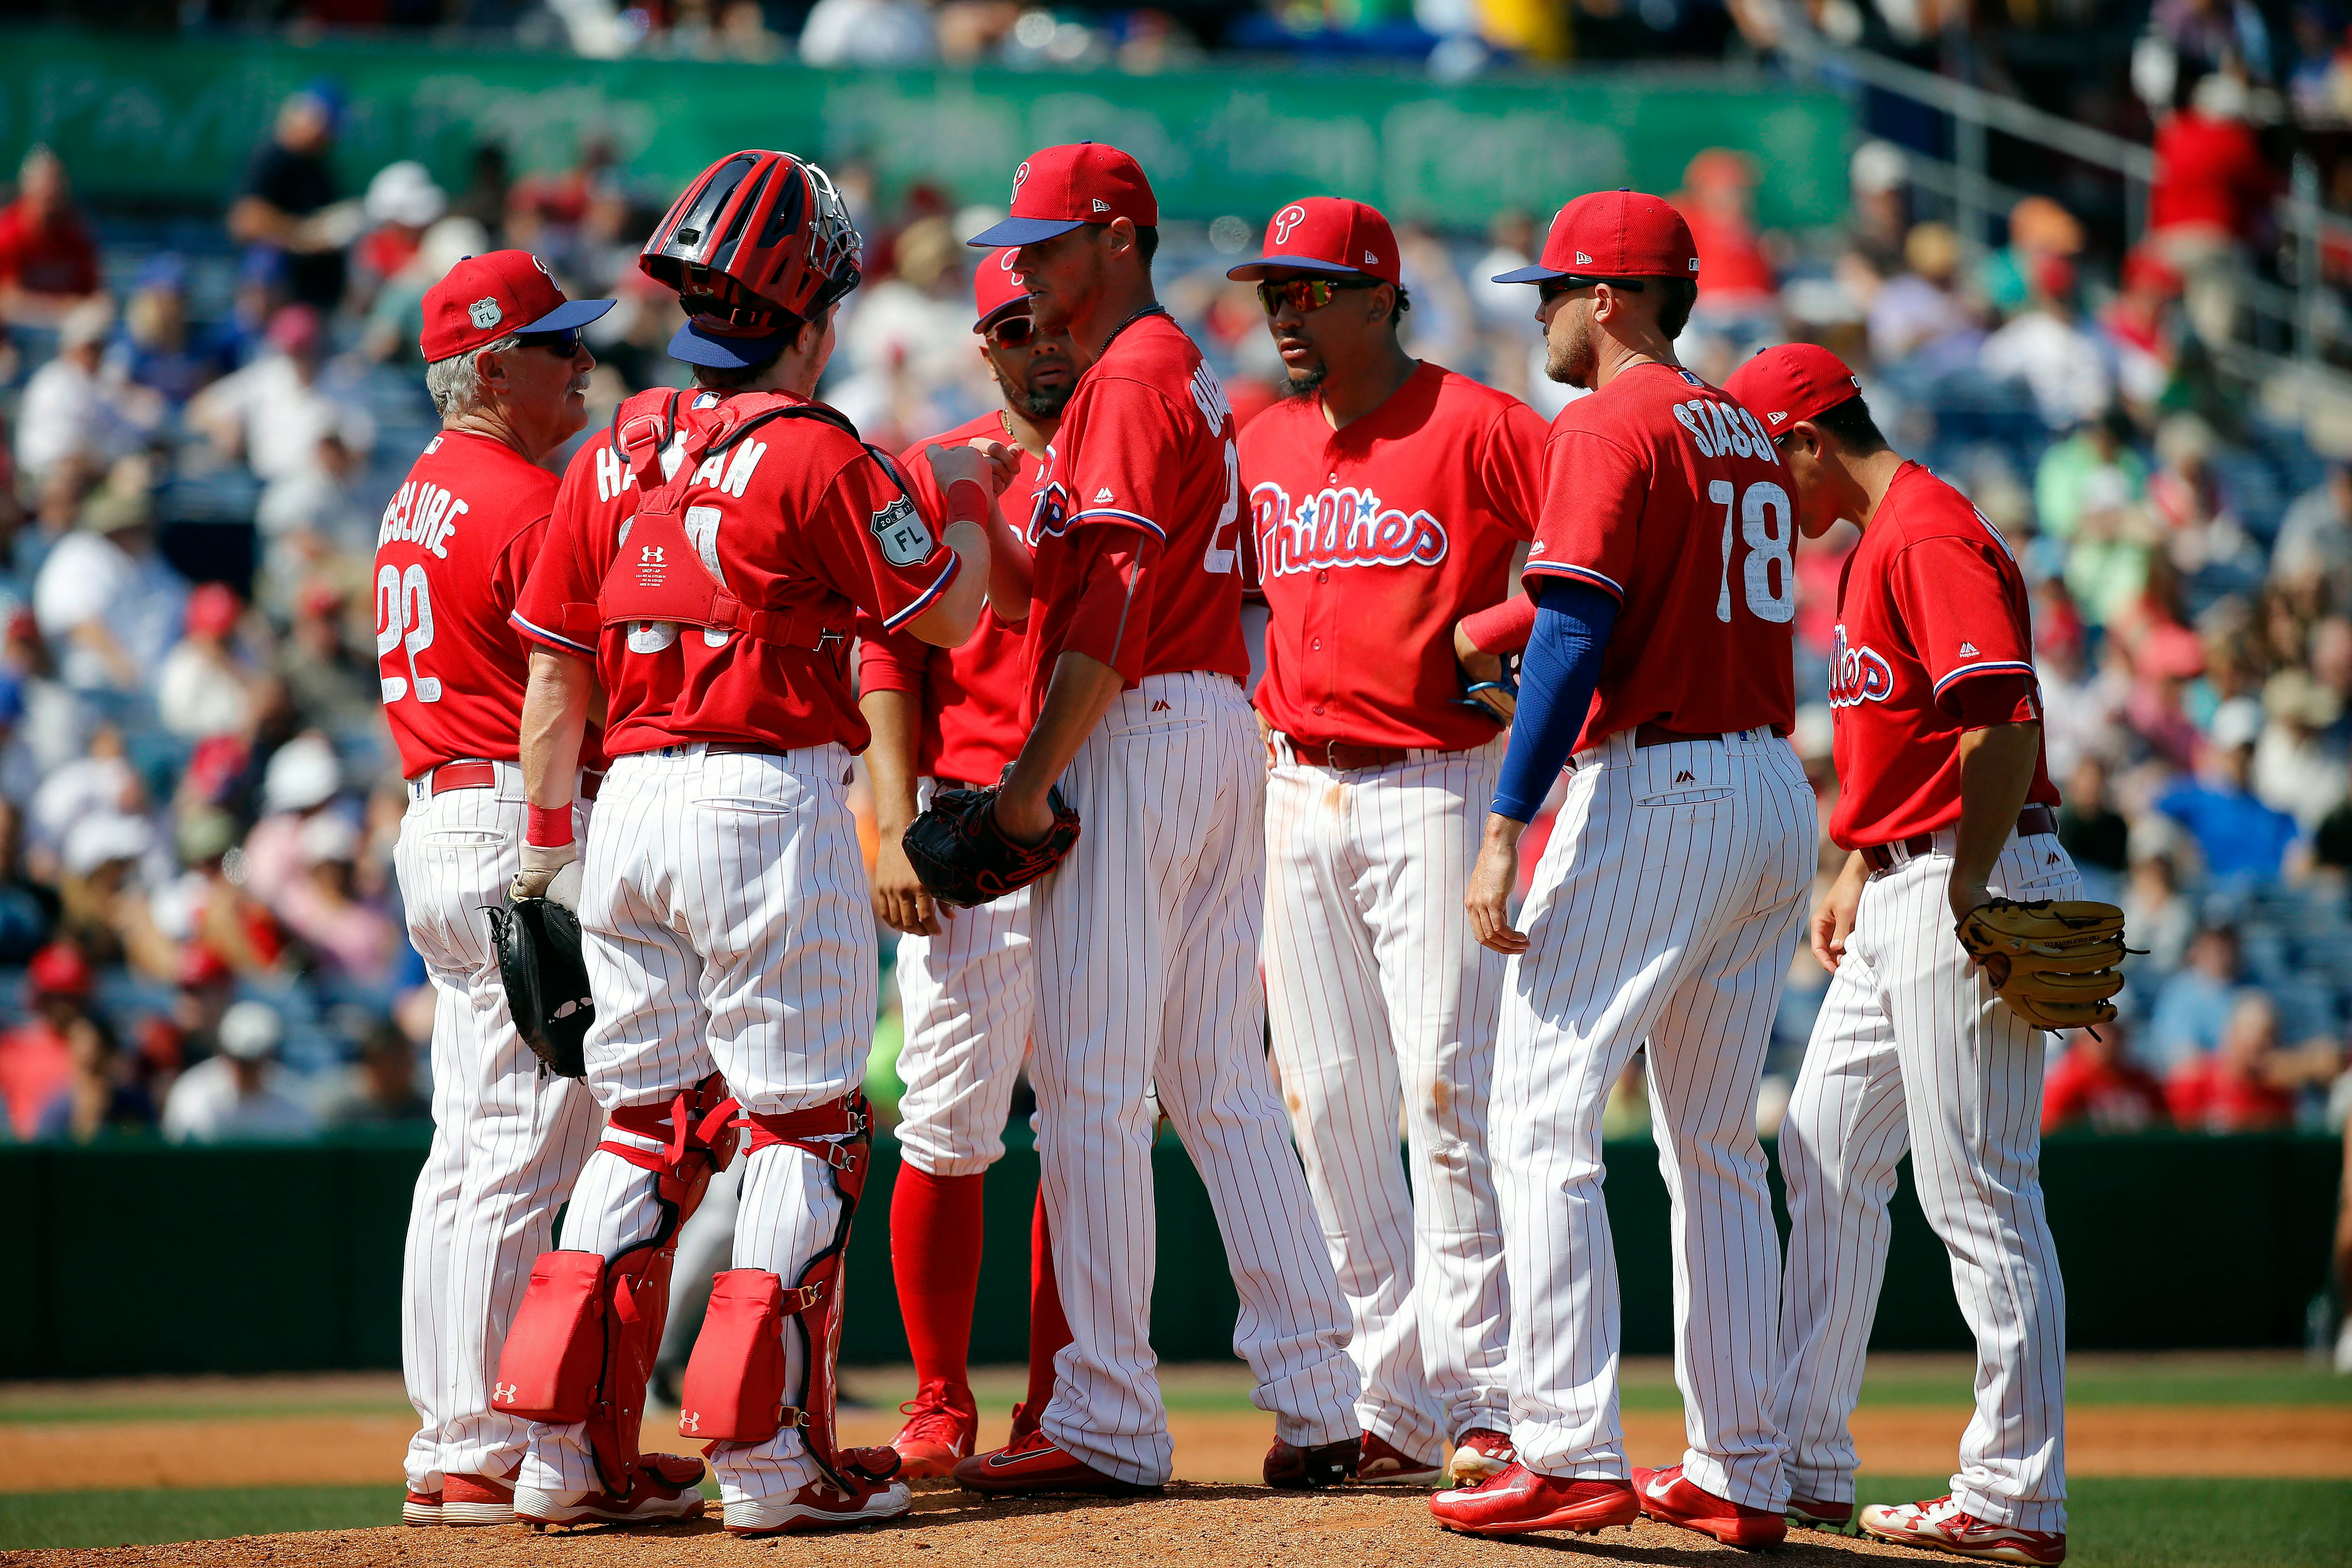 Philadelphia Phillies: Taking A Look At Who's Hot And Who's Cold So Far